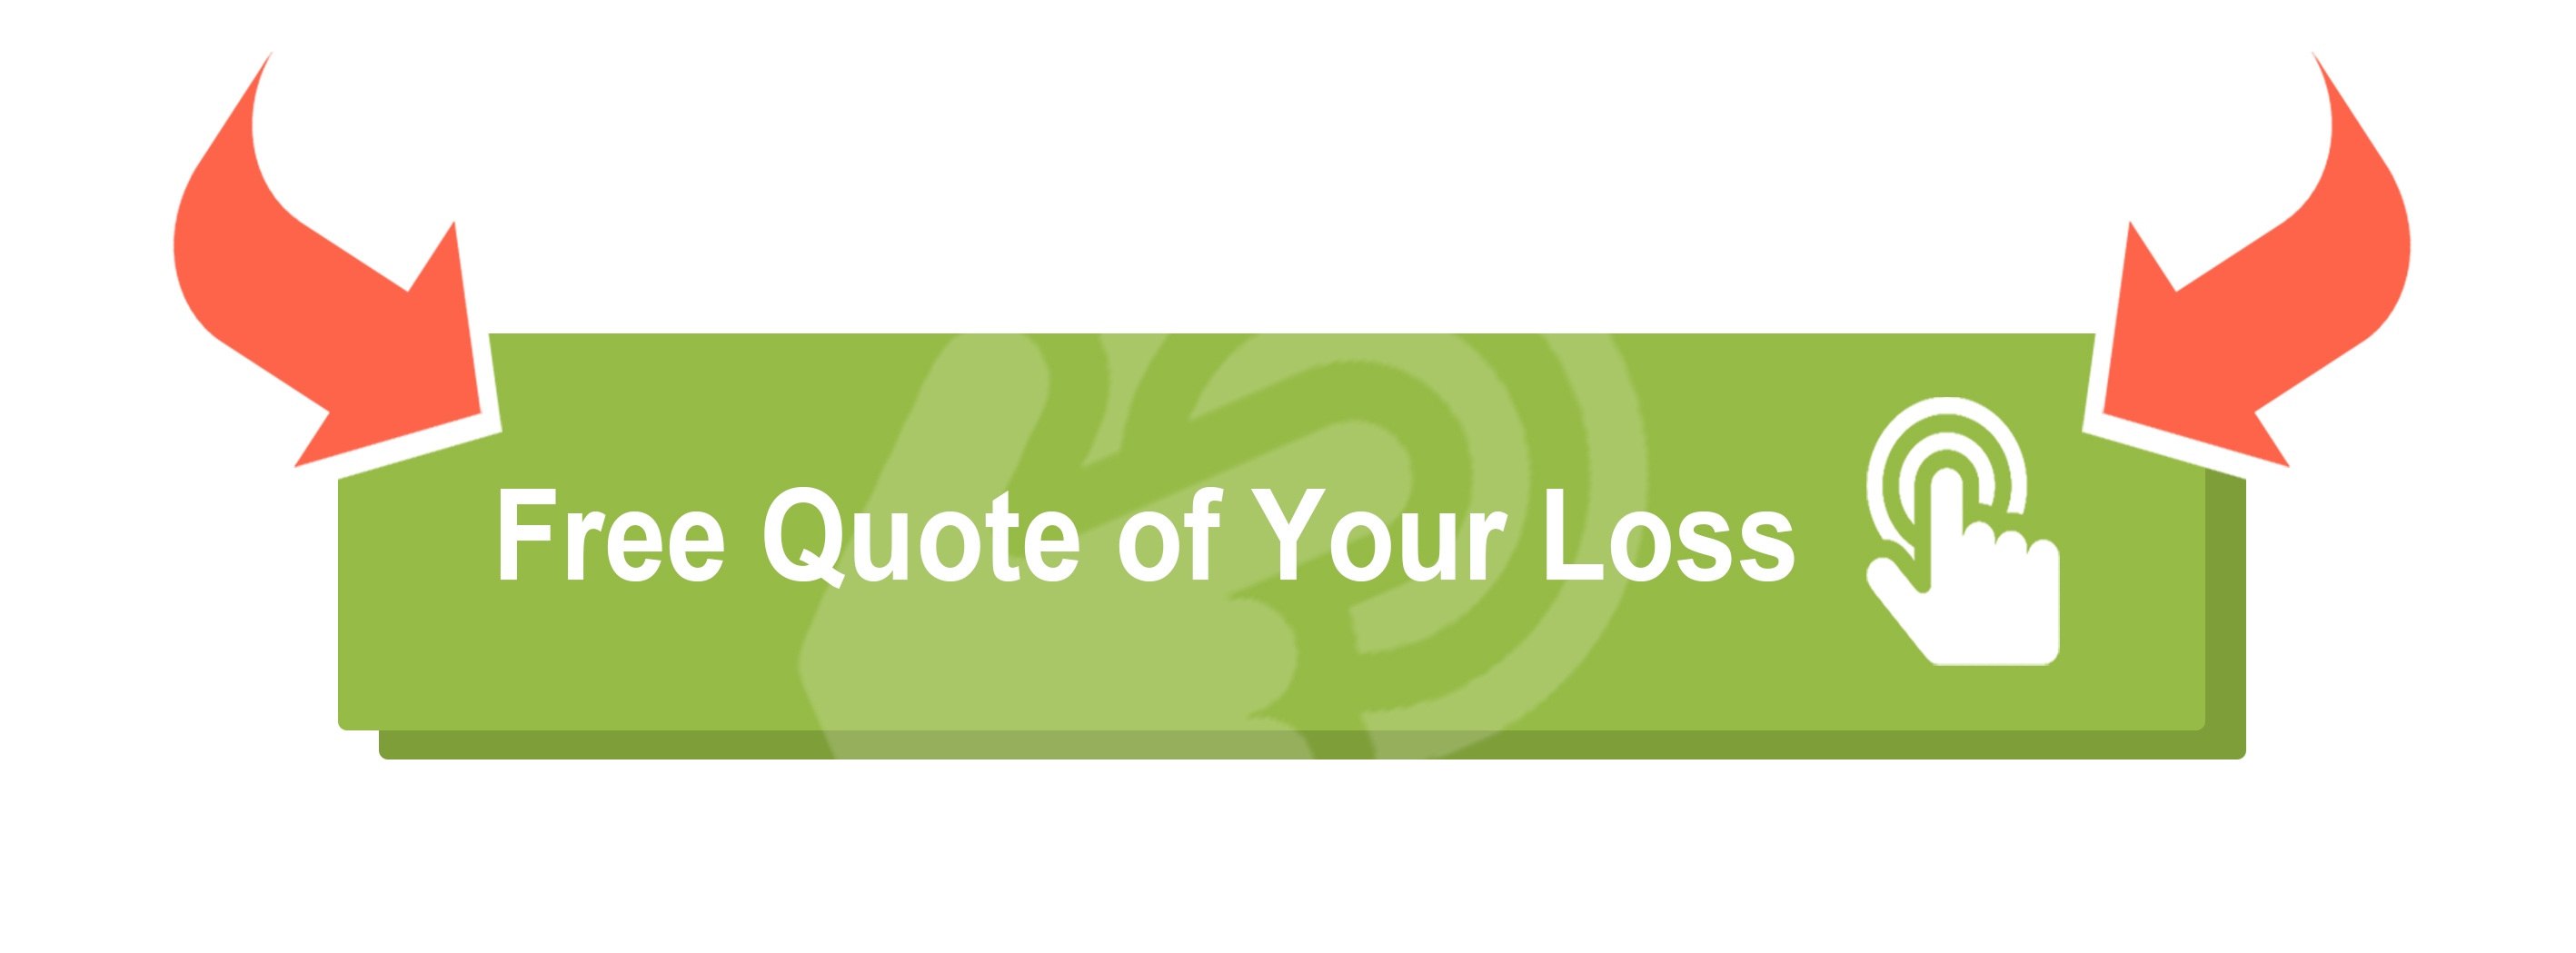 button_free-quote2_green_big2